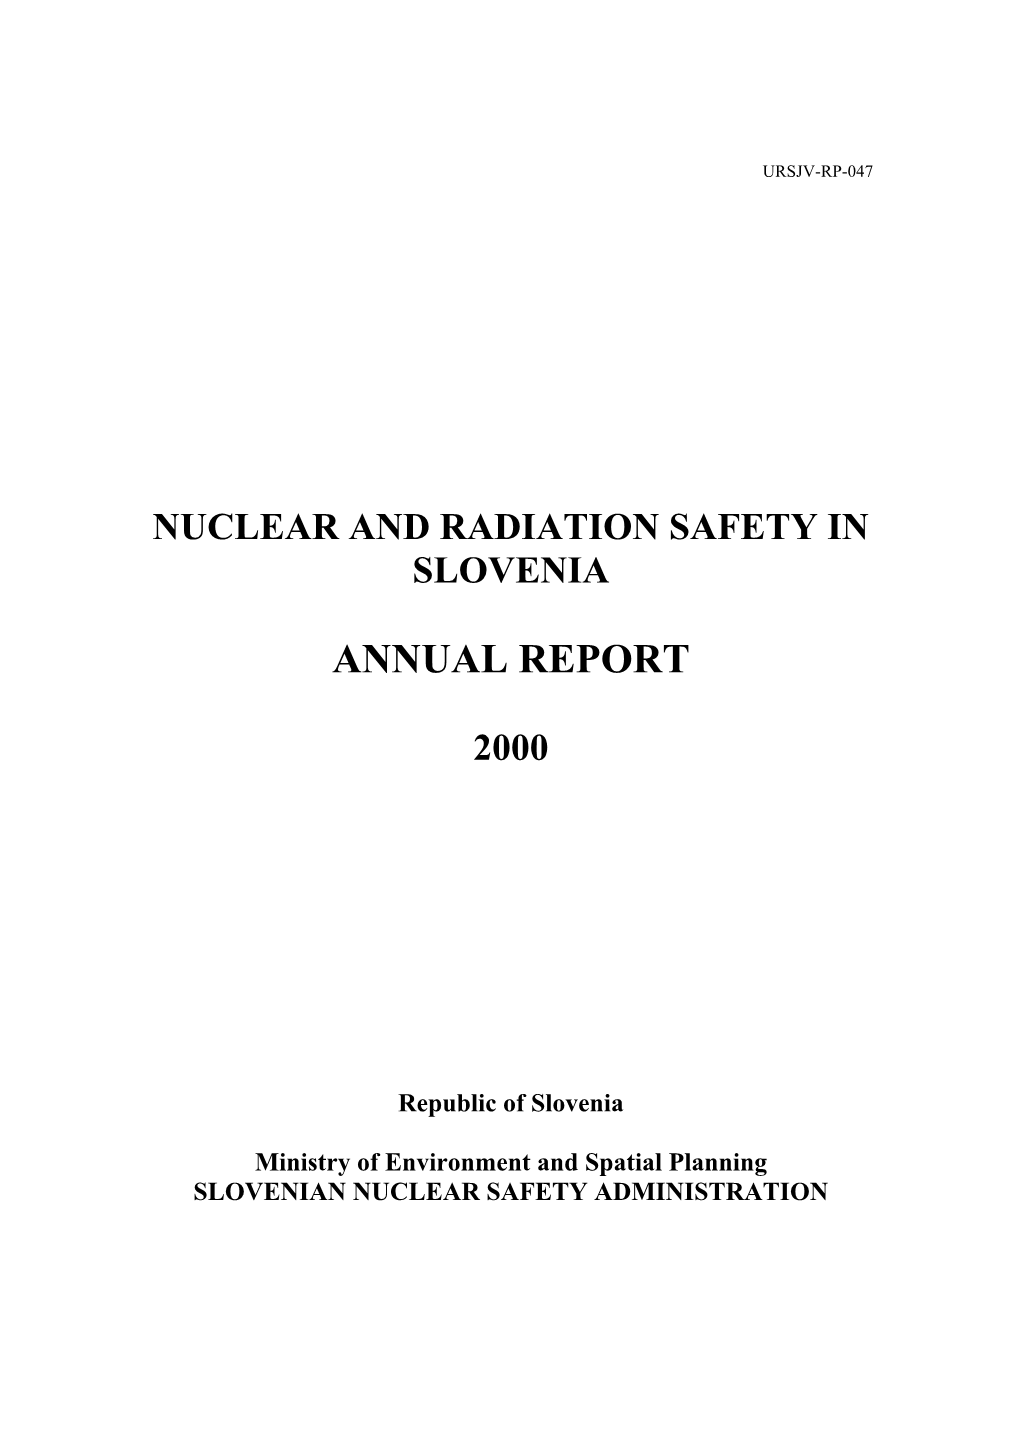 Nuclear and Radiation Safety in Slovenia